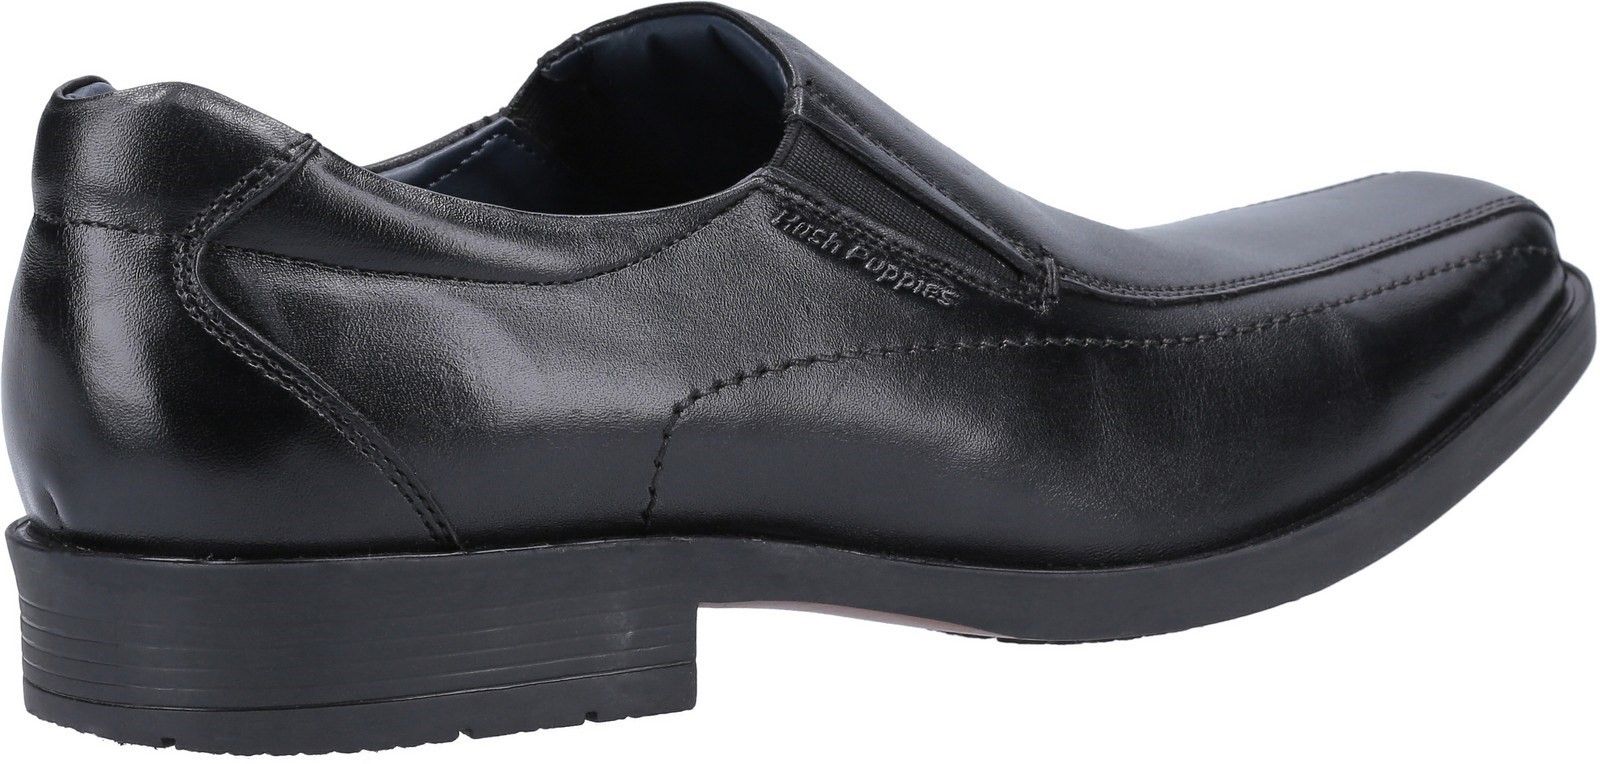 Classic Boys Back to School shoe from Hush Puppies - Brody crafted with premium leather uppers in a smart slip on apron toe seam style with elasticated gussets for easy on and off, comfortable memory foam sock and flexible soleSmart Leather Upper. 
Apron Toe Seam. 
Elasticated Twin Gussets for easy on and off. 
Flexible Rubber Sole. 
Memory Foam Sock.